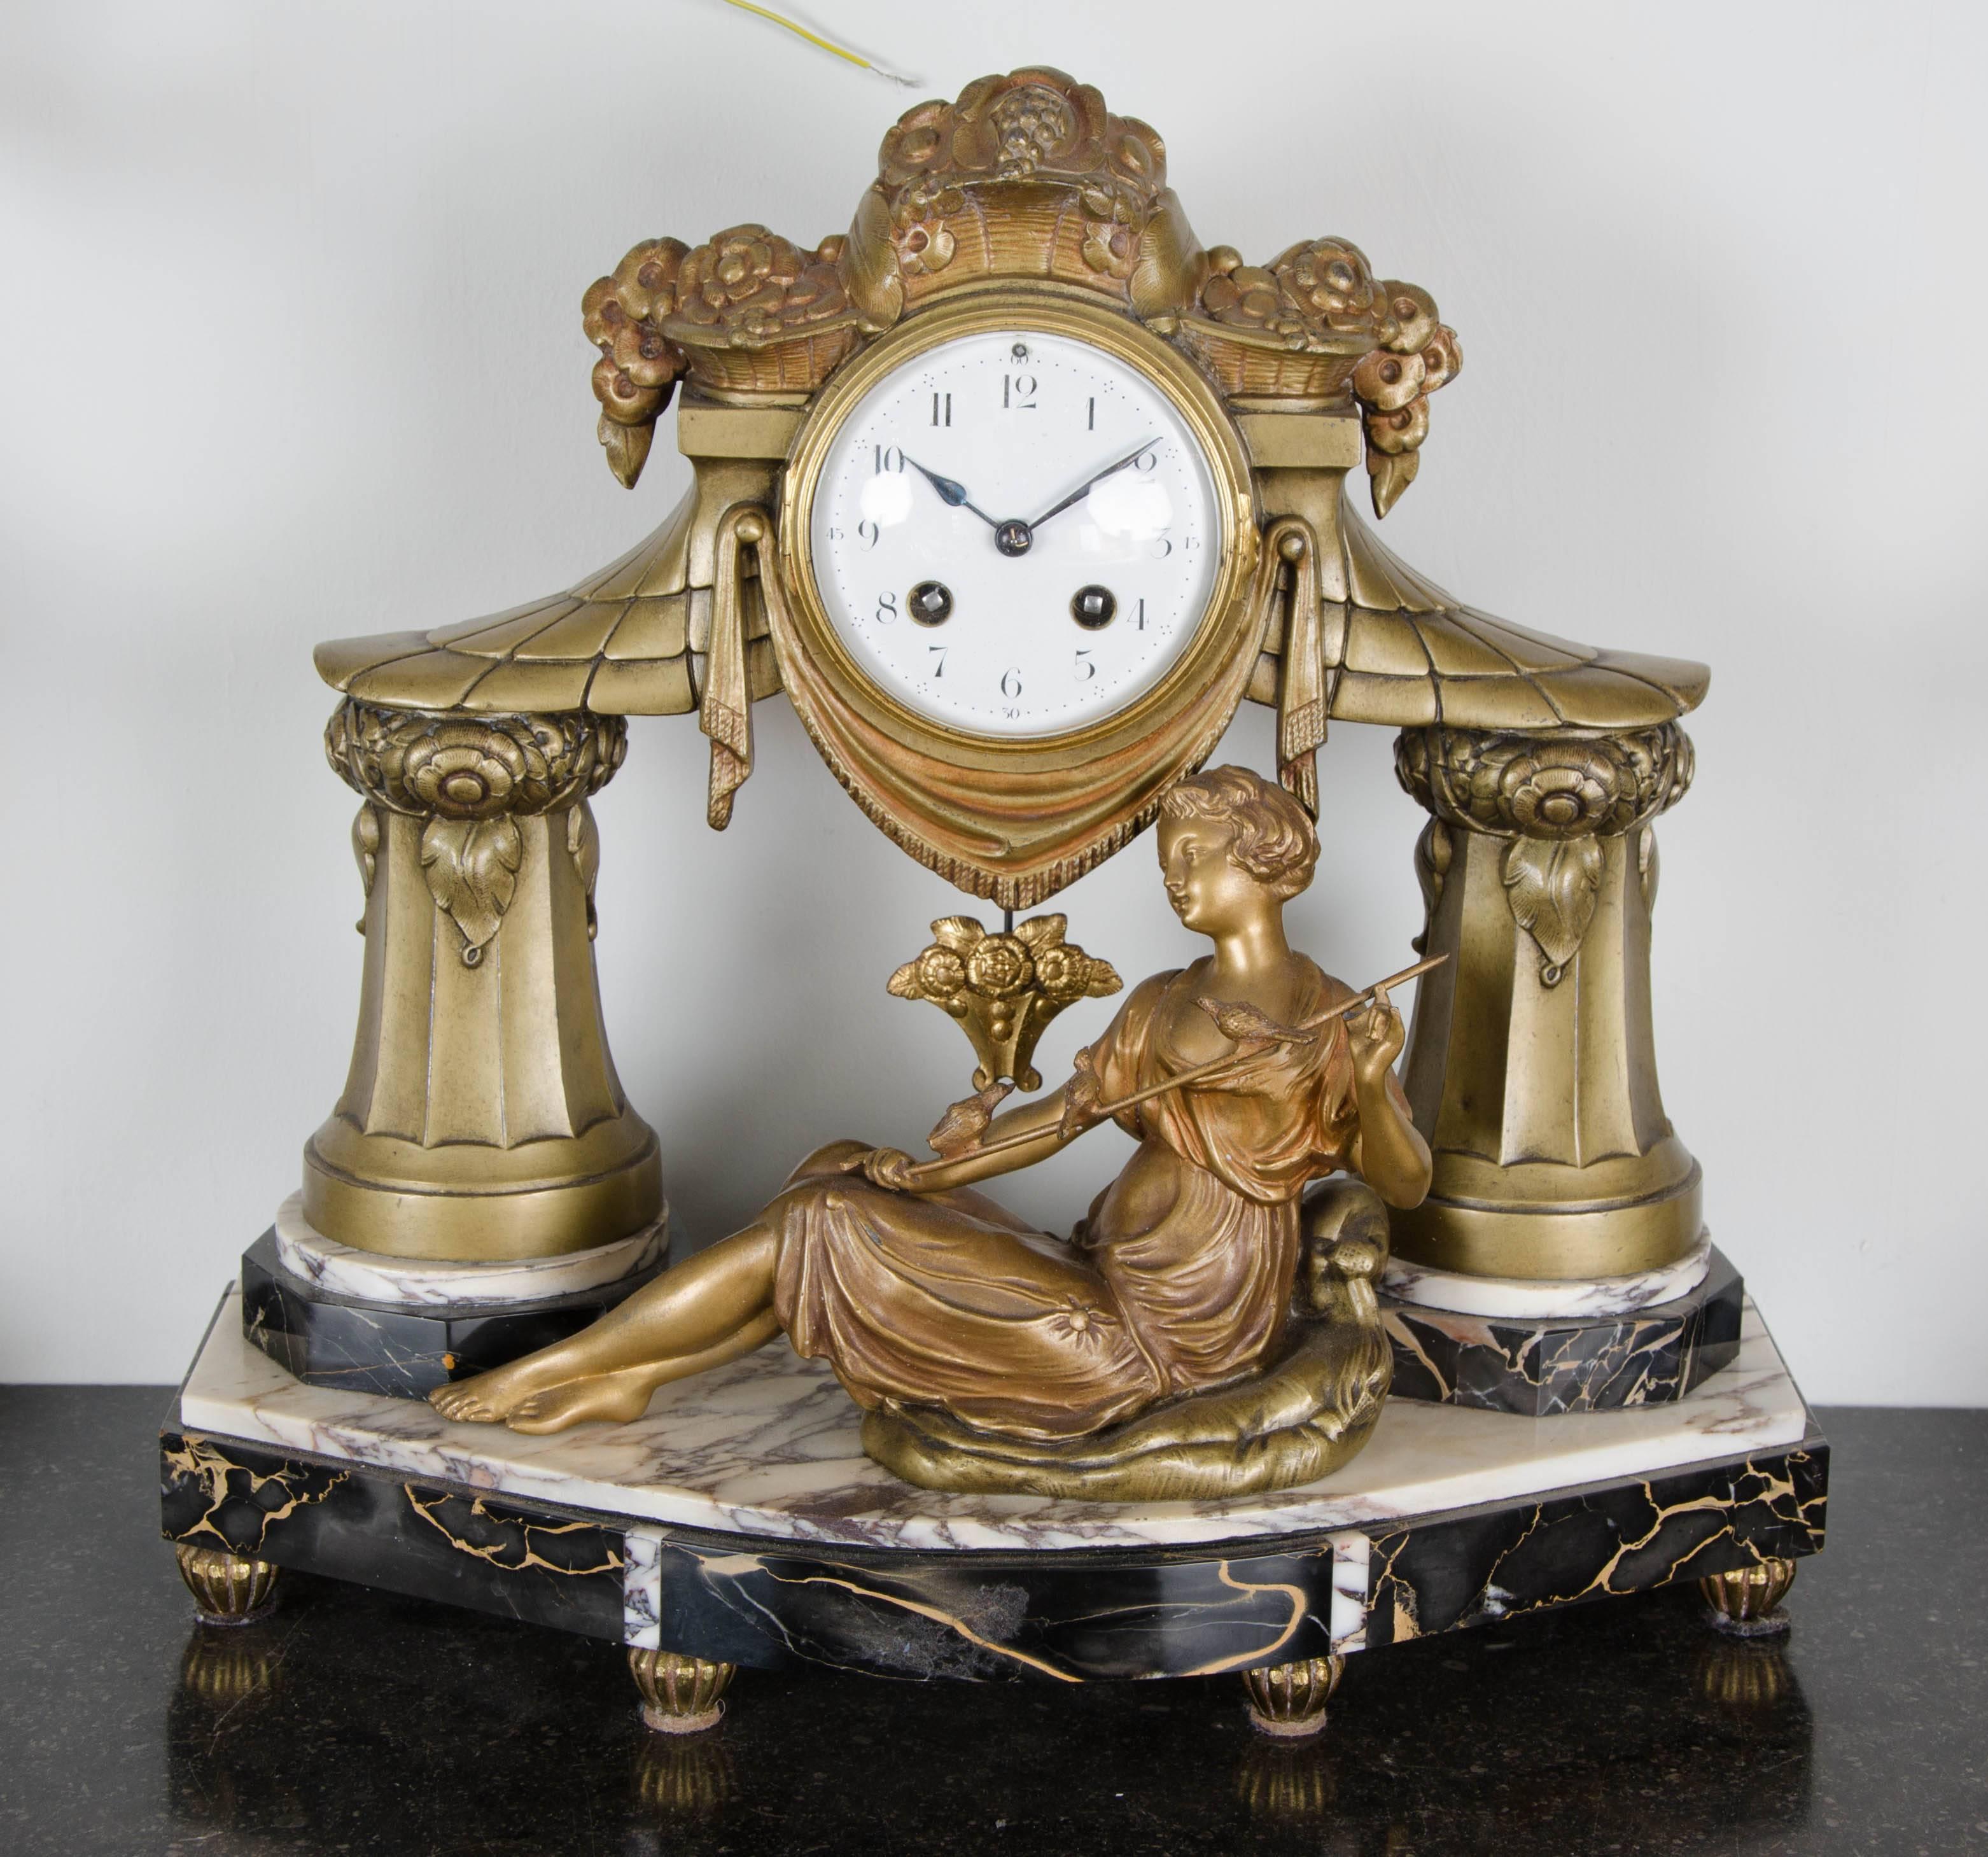 A French Art Deco clock garniture, signed Limousin. Patinated spelter and Portoro and Violet Breche marble.

Movement by Societe Clusienne S.C.A.P.H. of Cluses. With chime.

In working order.